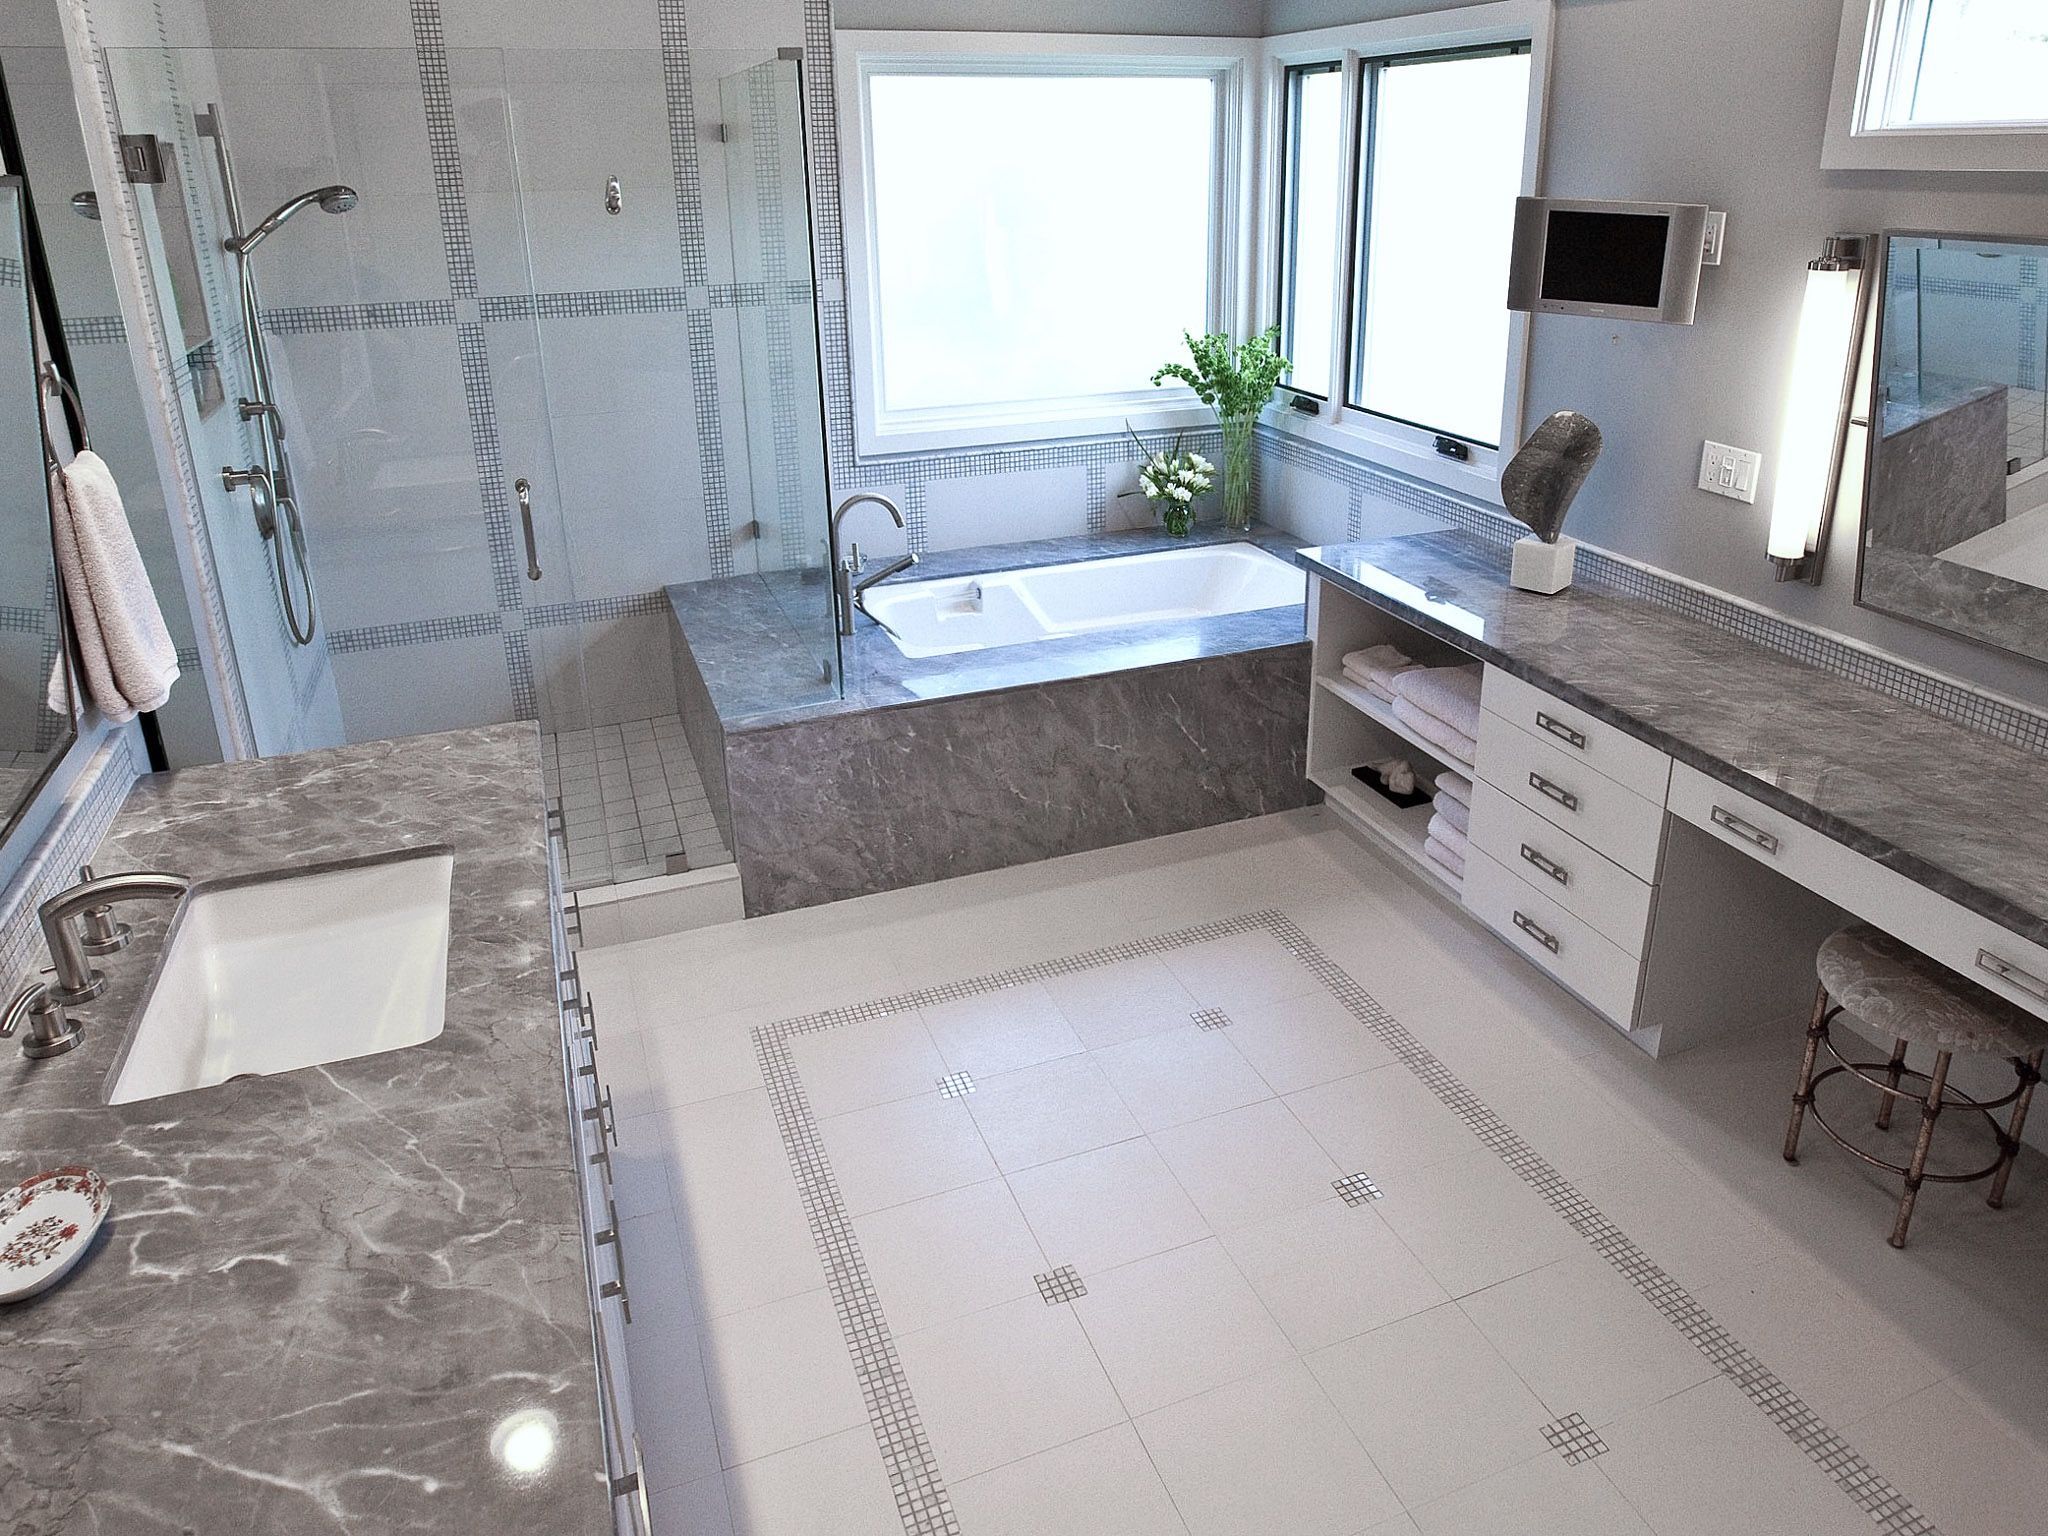 Porcelain And Mosaic Bathroom Floor Tiles (View 23 of 25)